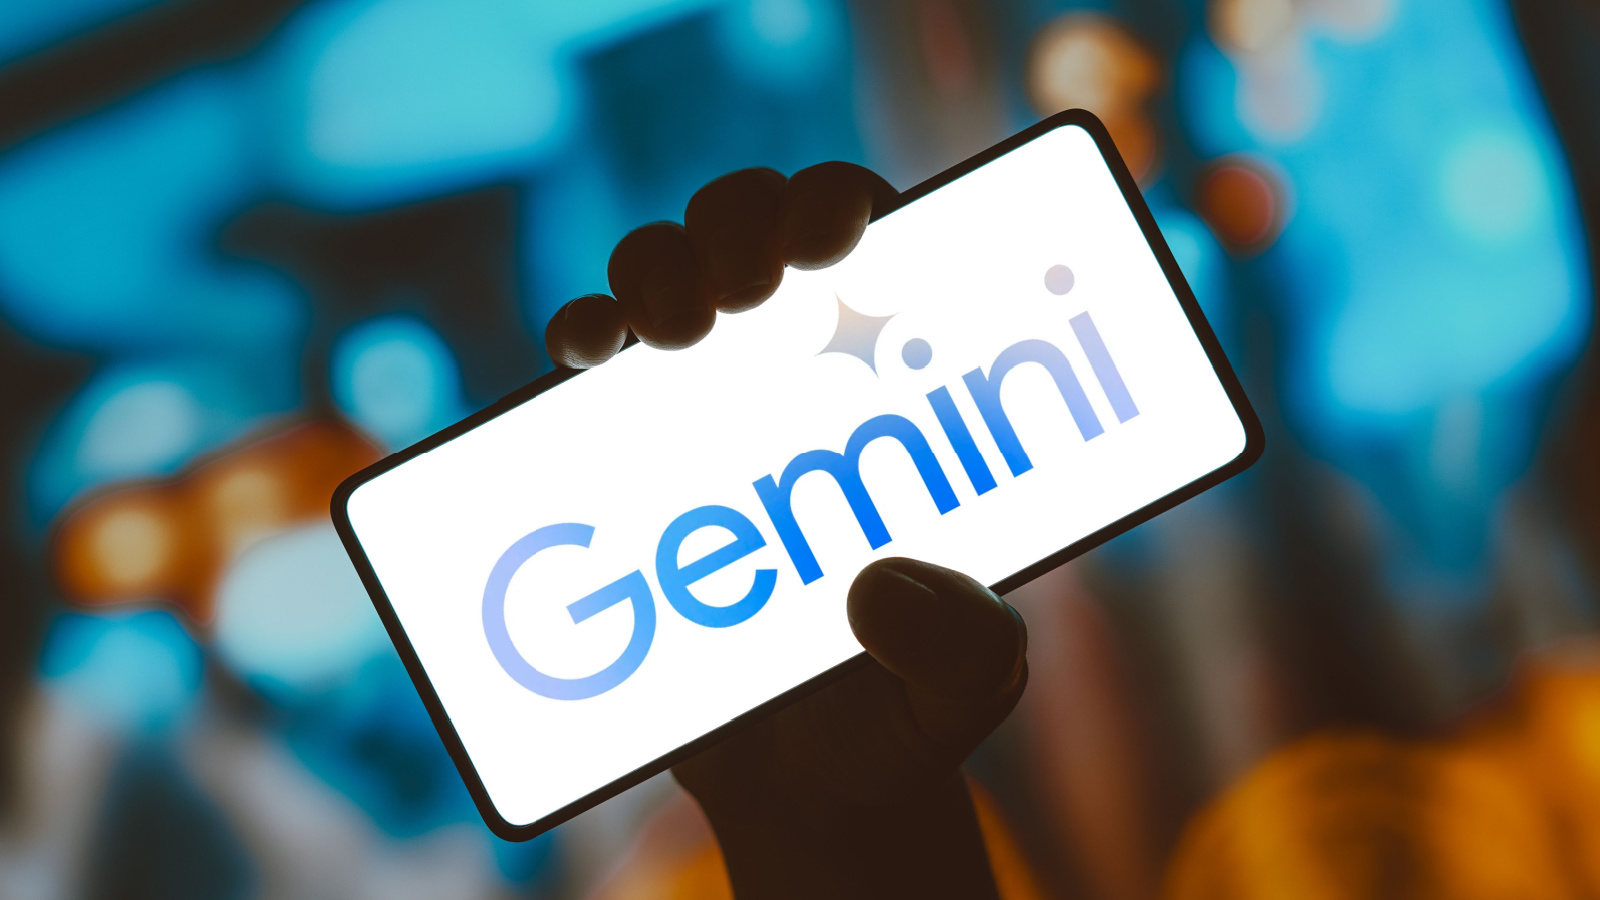 Start using Gemini mobile, finally on your screens!